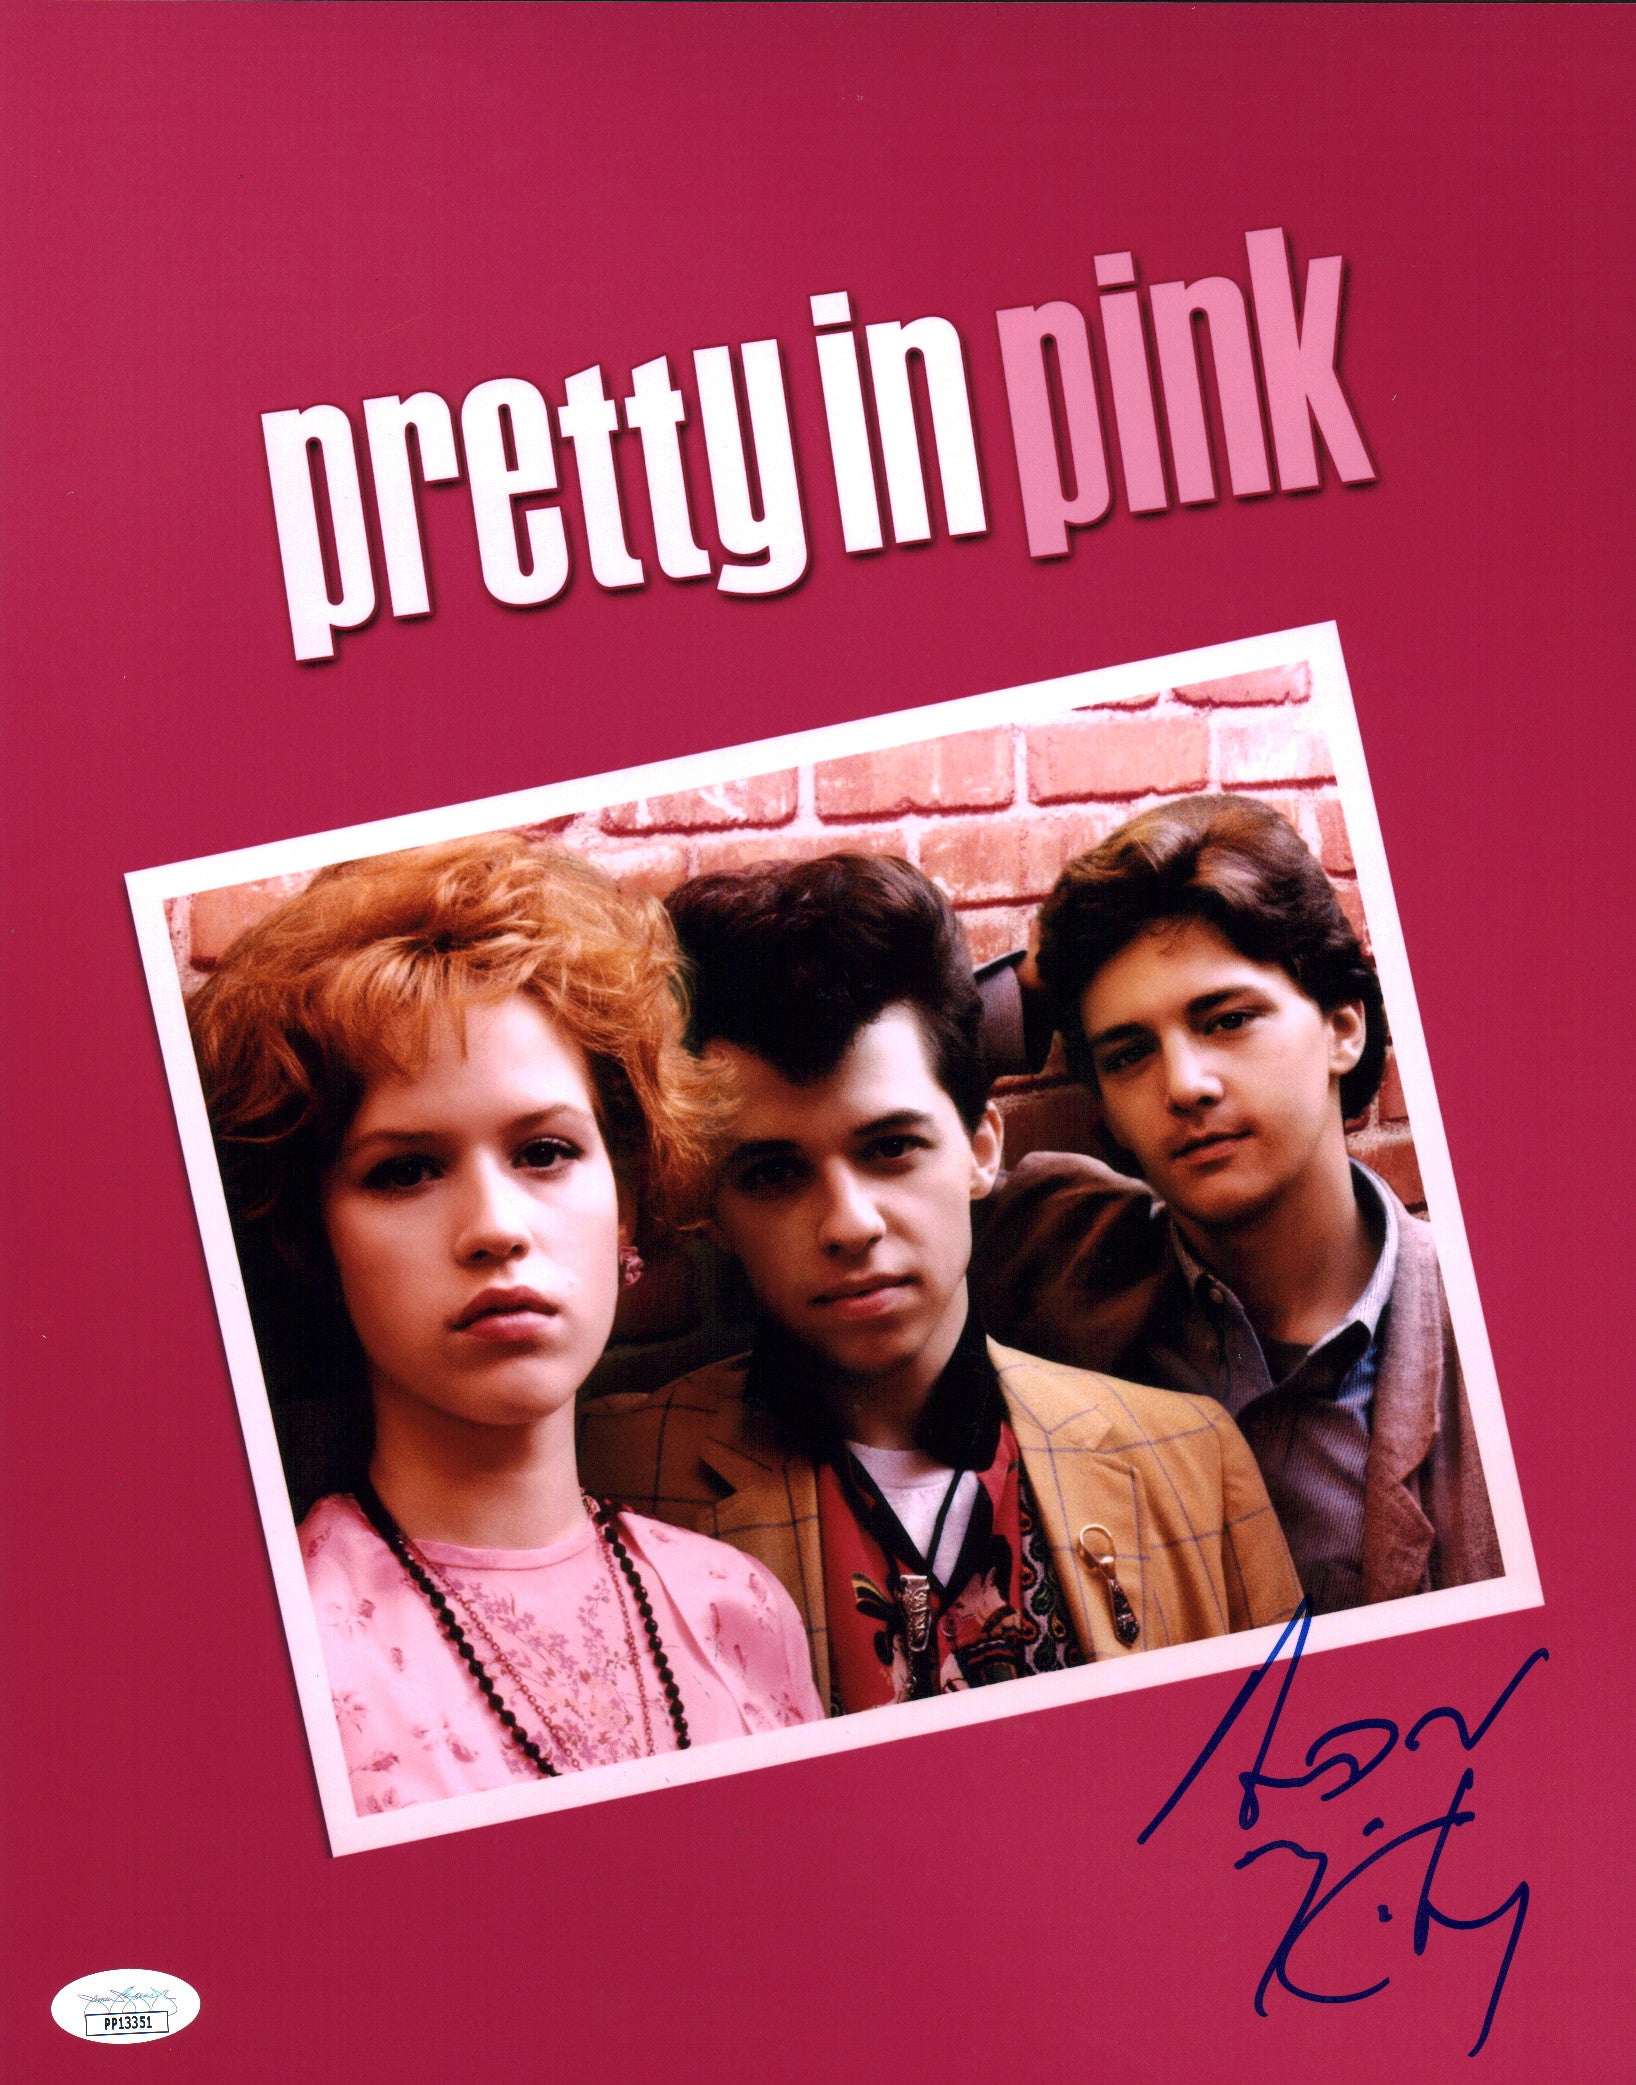 Andrew McCarthy Pretty in Pink 11x14 Signed Photo Poster JSA Certified Autograph